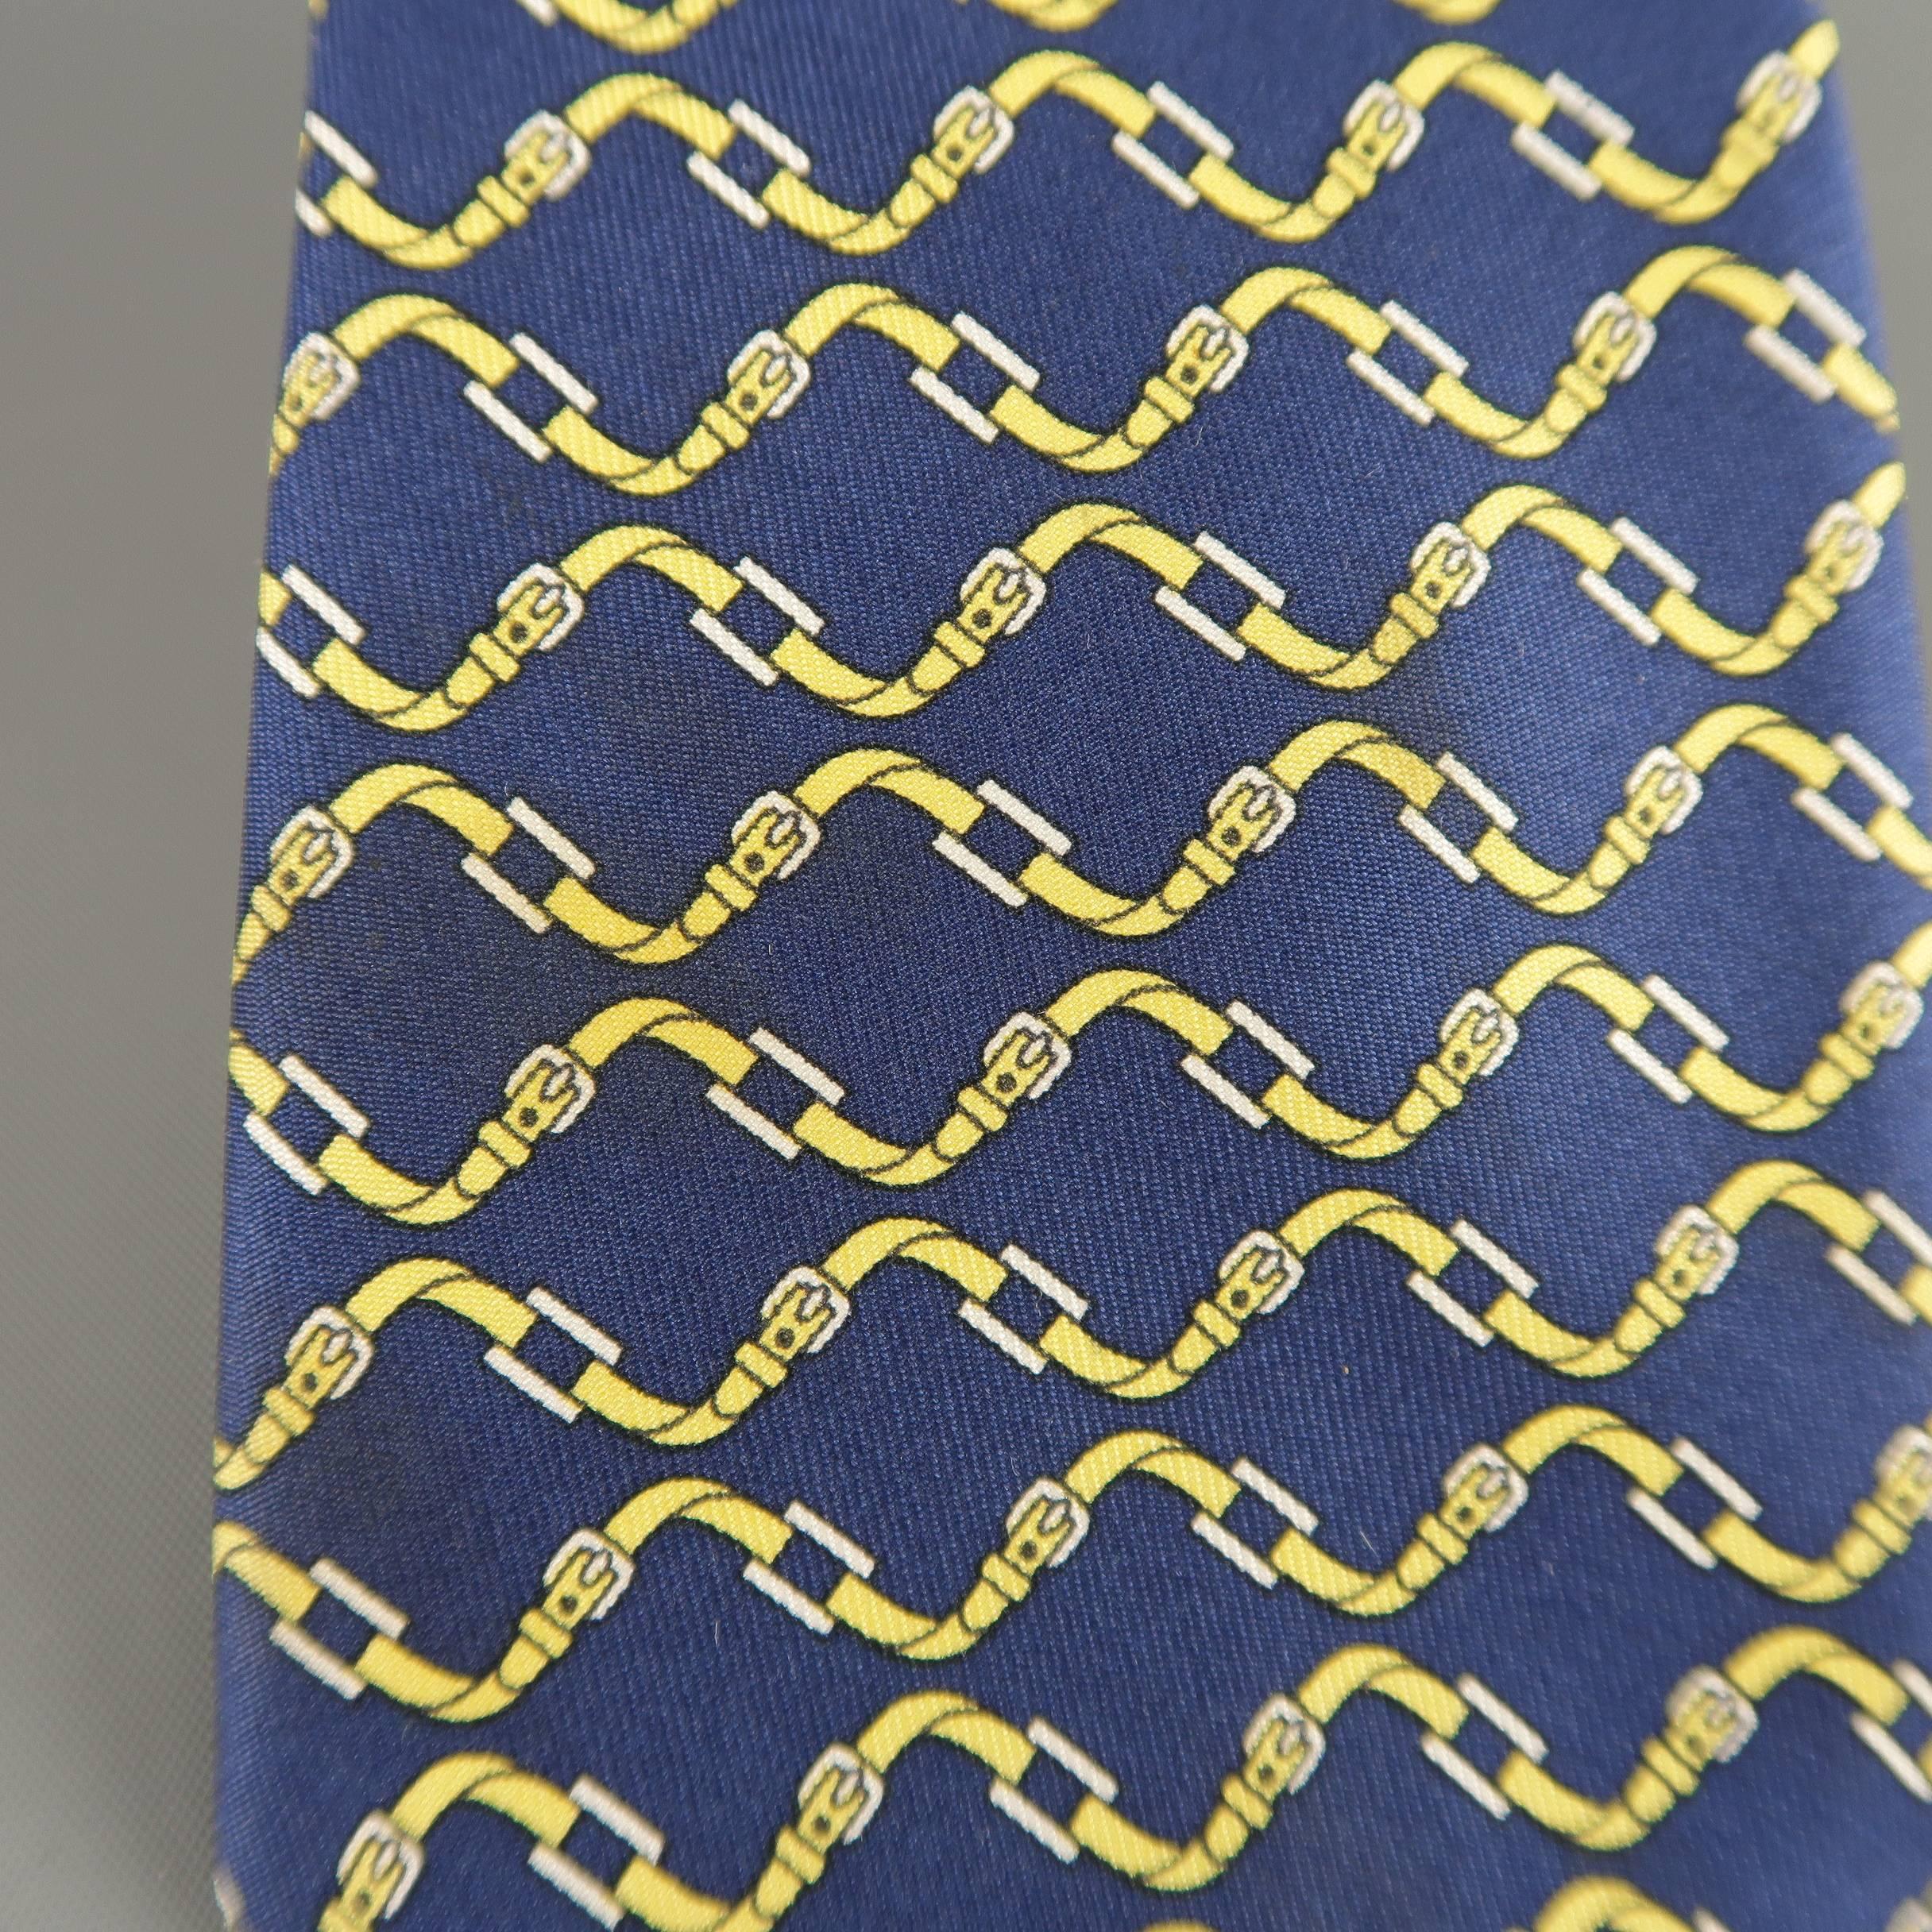 Vintage HERMES necktie comes in navy silk twill with all over yellow belt print. Wear throughout. As-is. Made in France.
 
Fair Pre-Owned Condition.
 
Width: 3.25 in.
